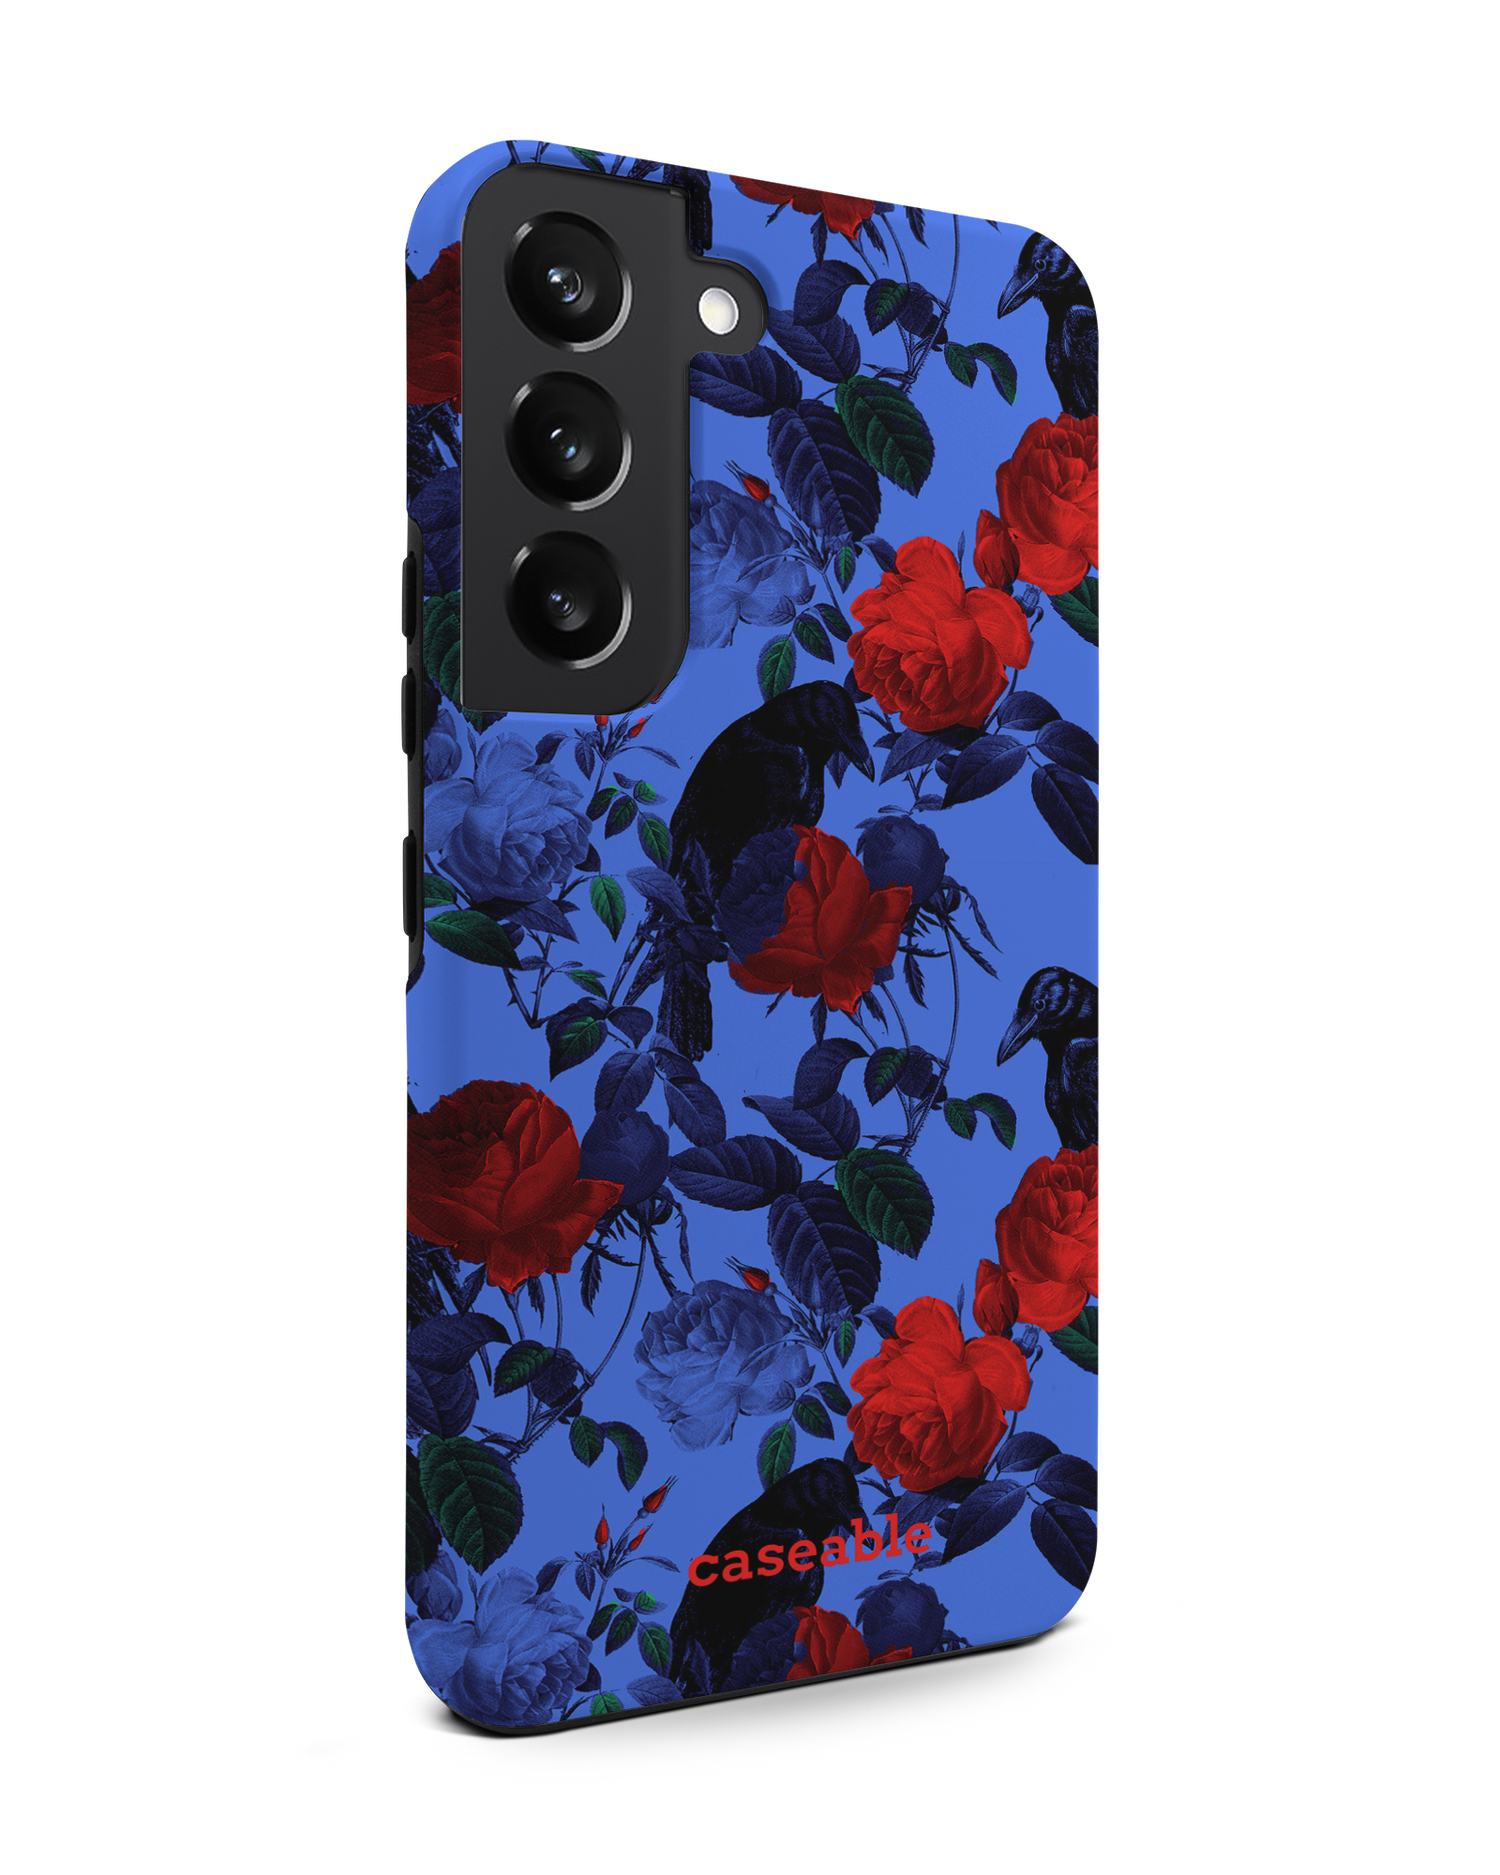 Roses And Ravens Premium Phone Case Samsung Galaxy S22 5G: View from the left side